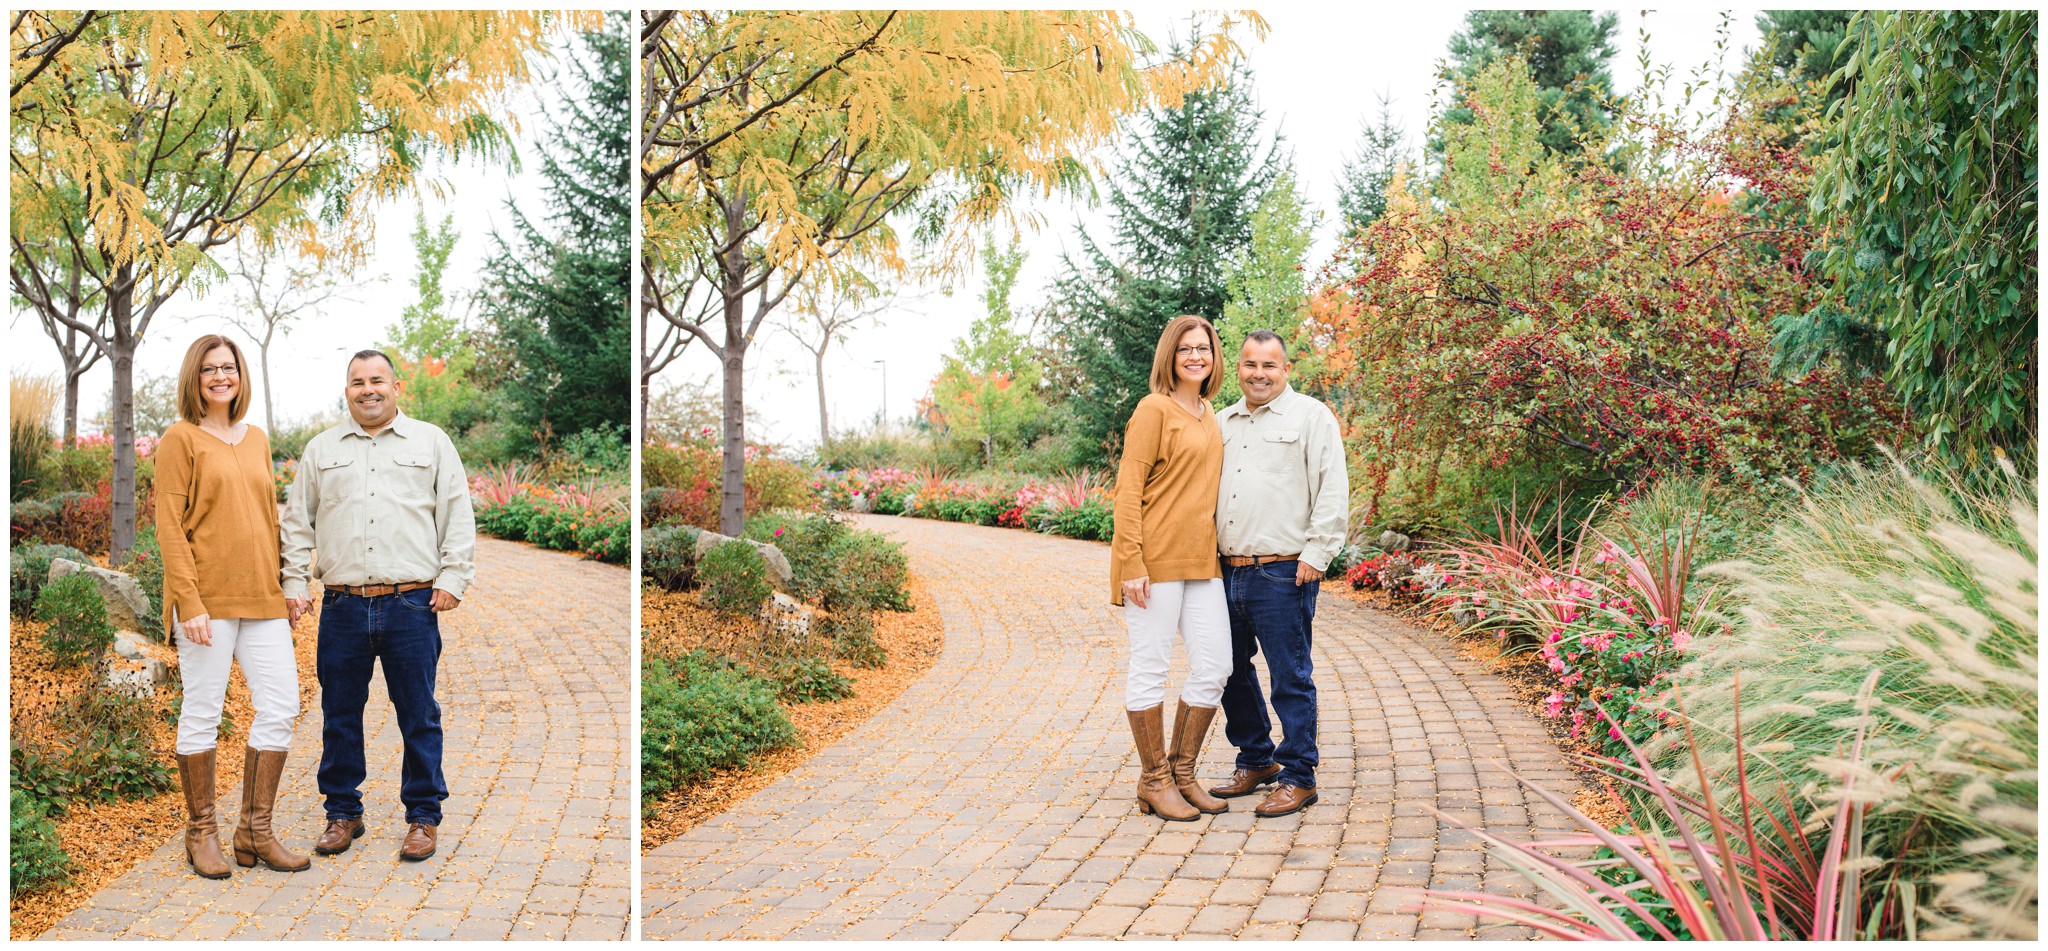 Extended family session in Idaho falls